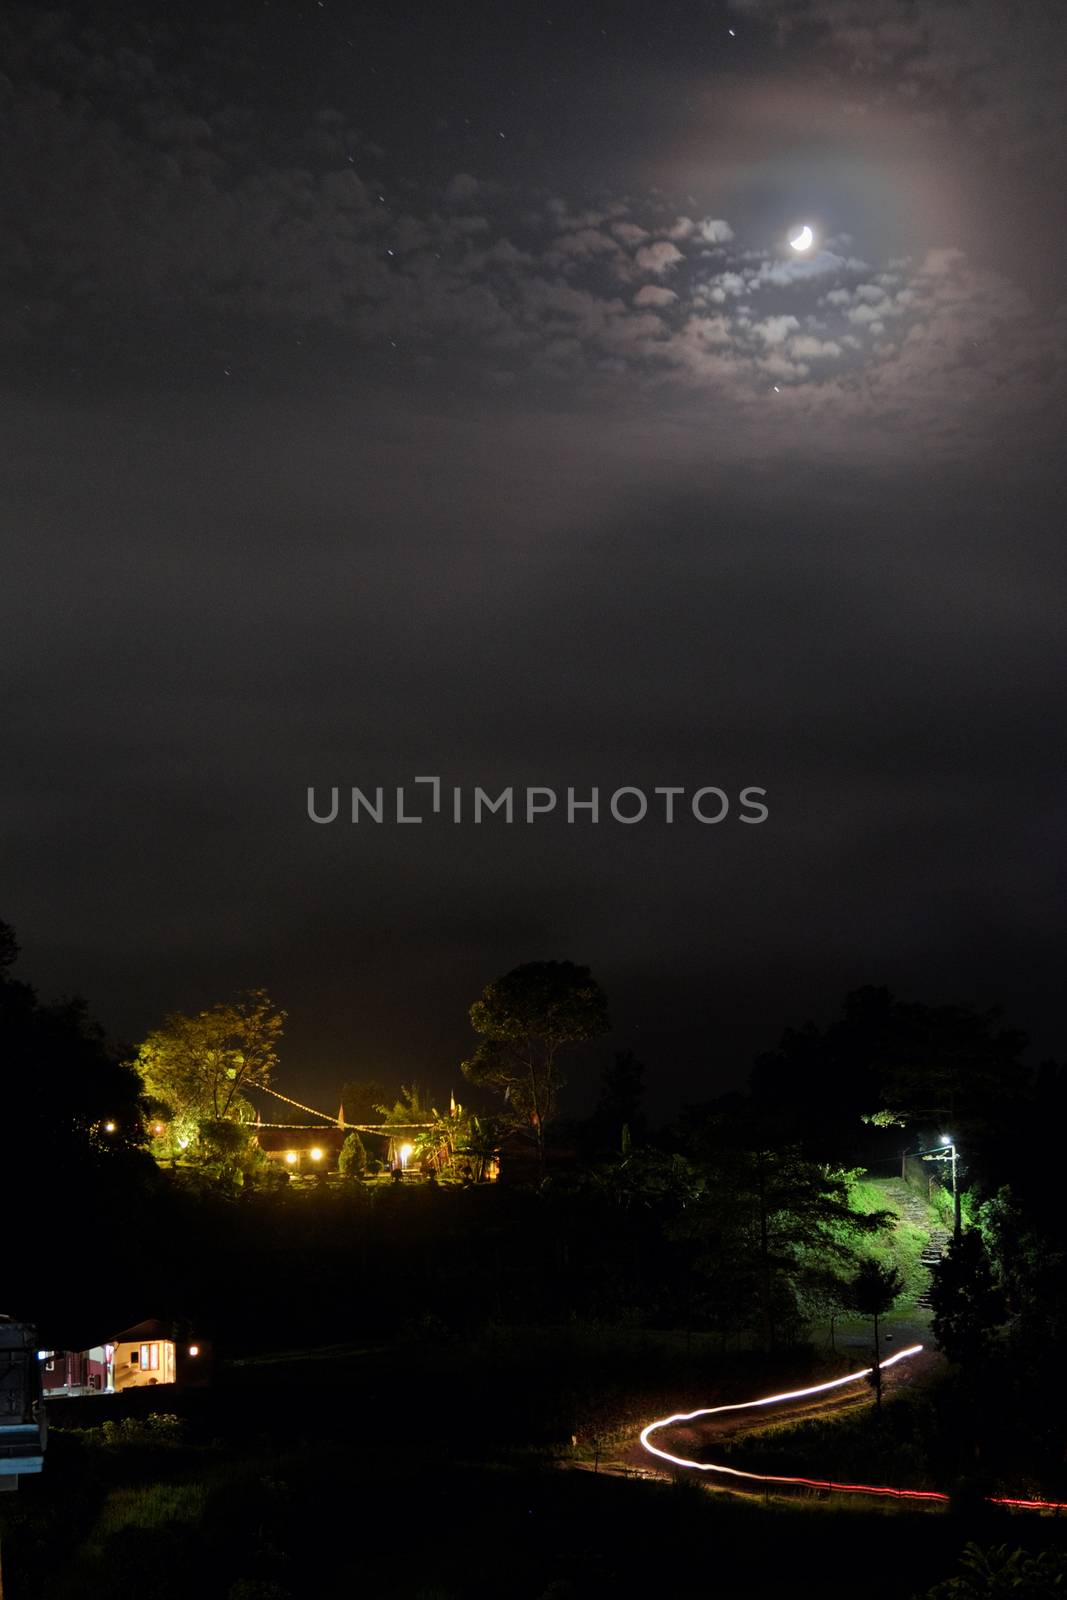 Night landscape with the moon, clouds and lighted buildings.